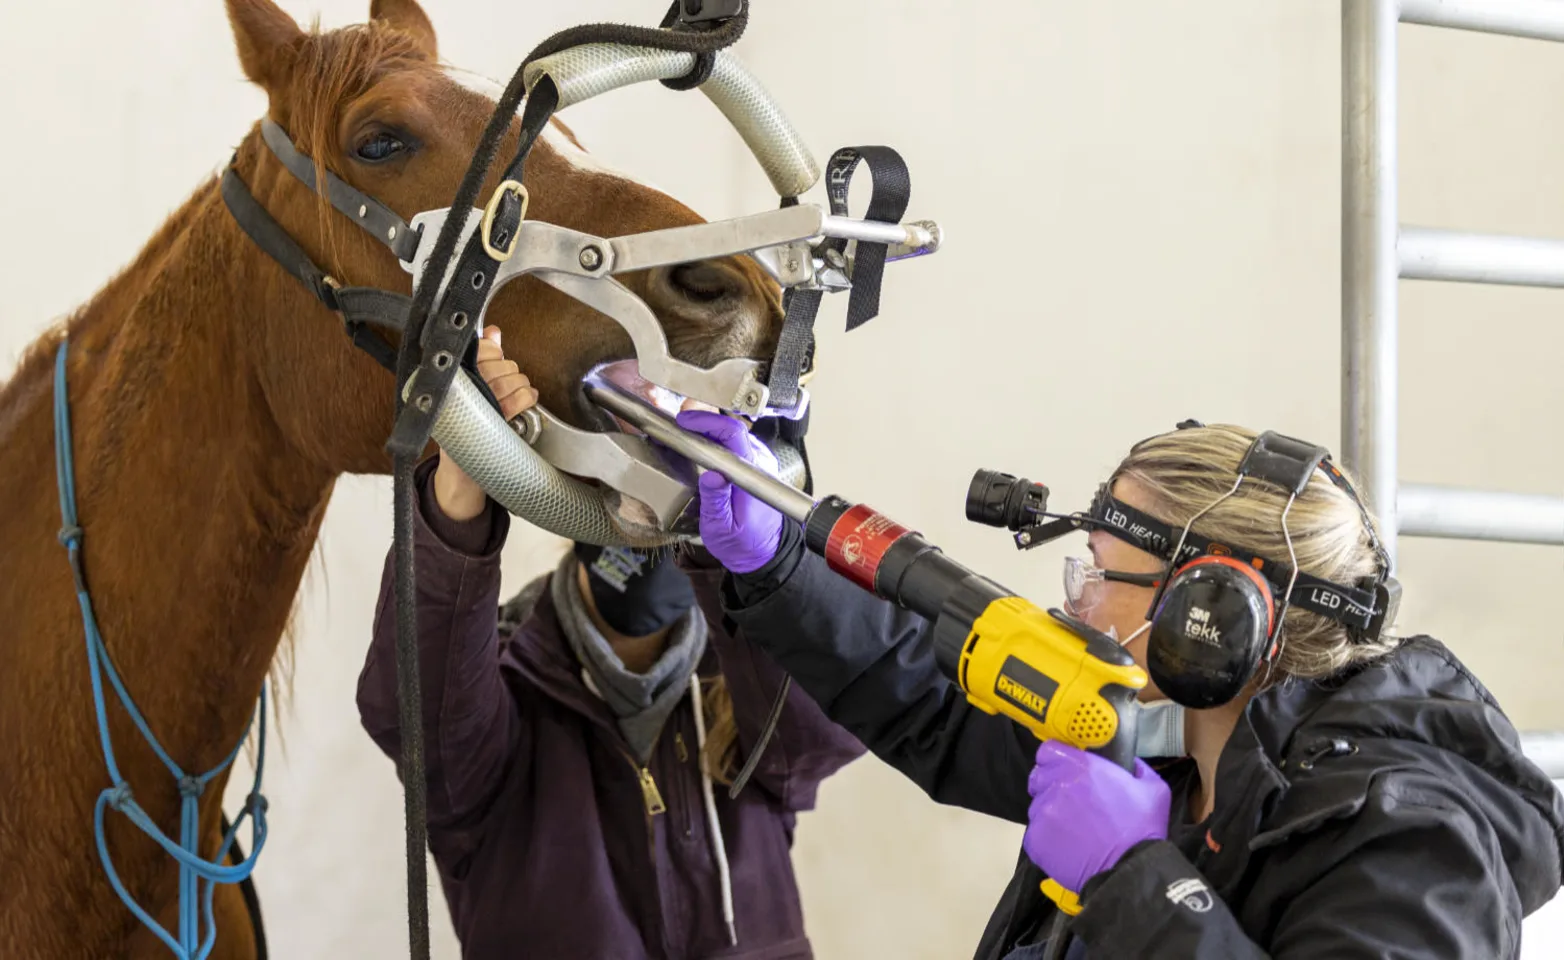 Horse receiving dental treatment by staff at Clover Valley Veterinary Services.